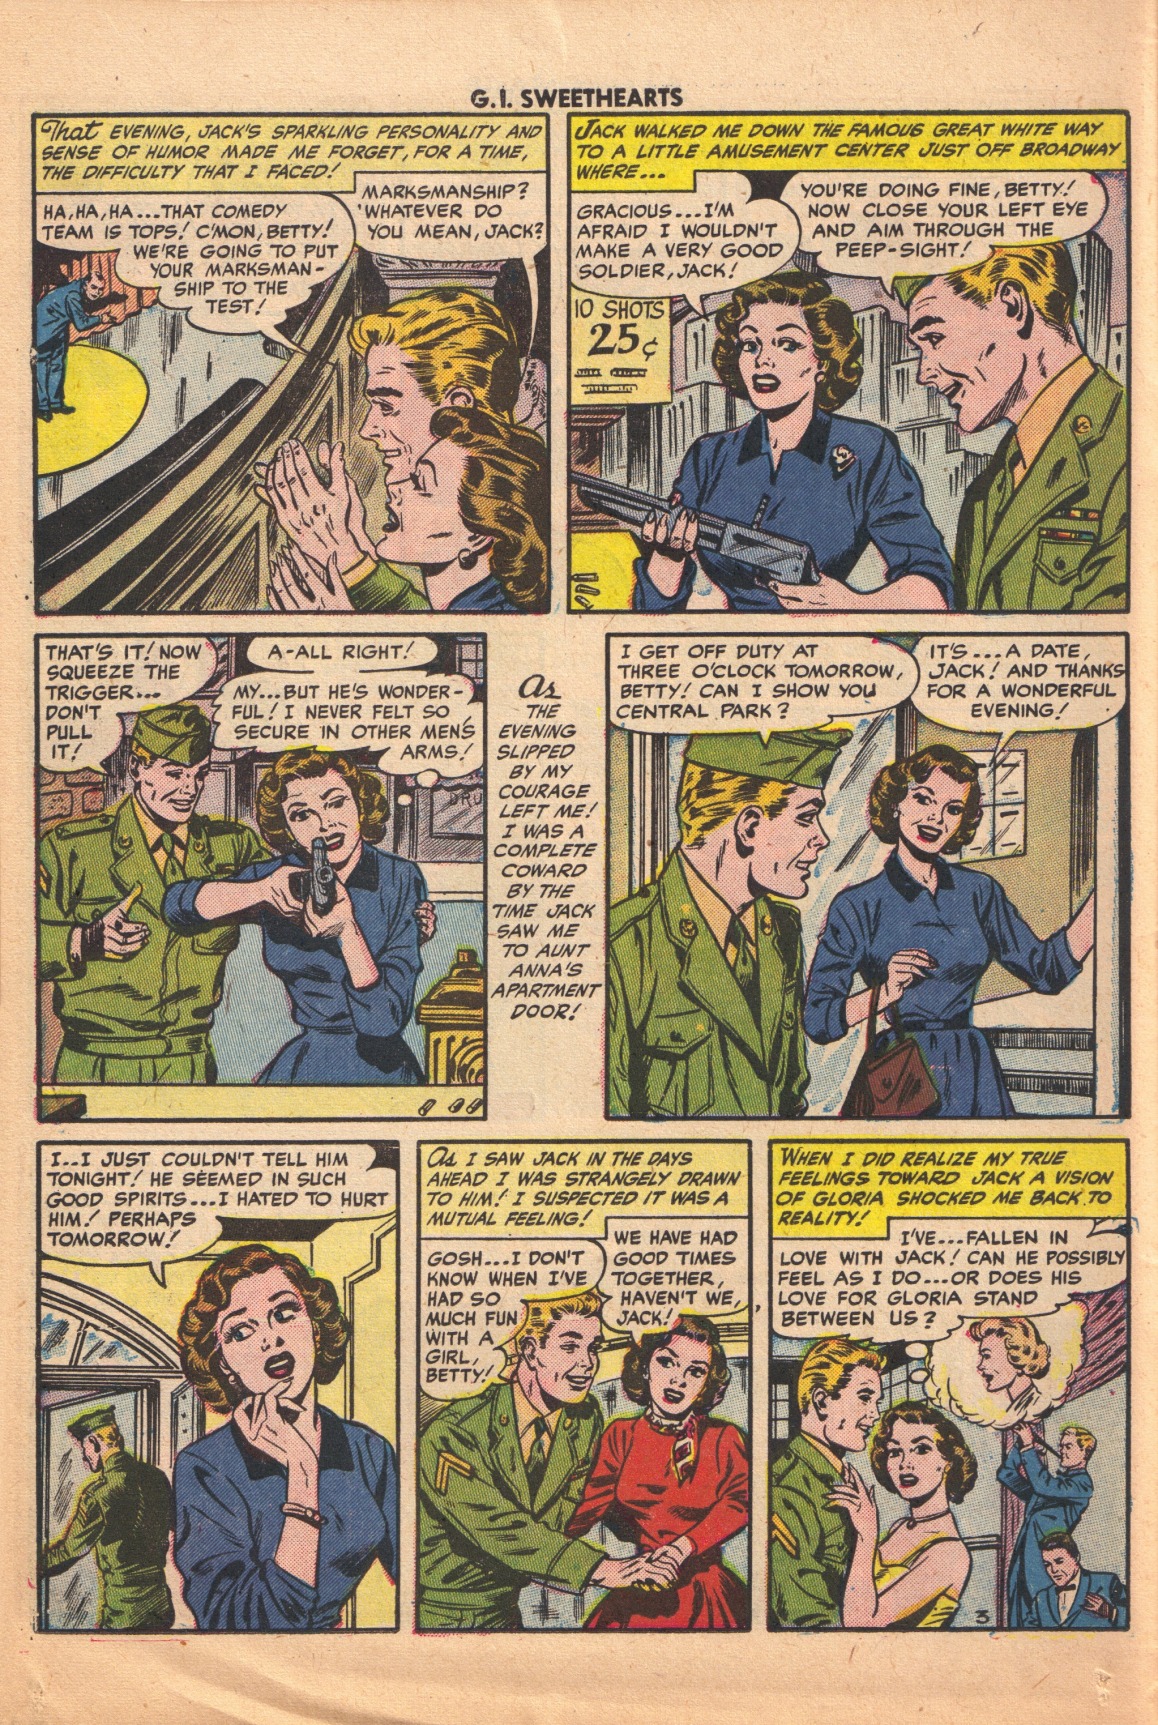 Read online G.I. Sweethearts comic -  Issue #40 - 14